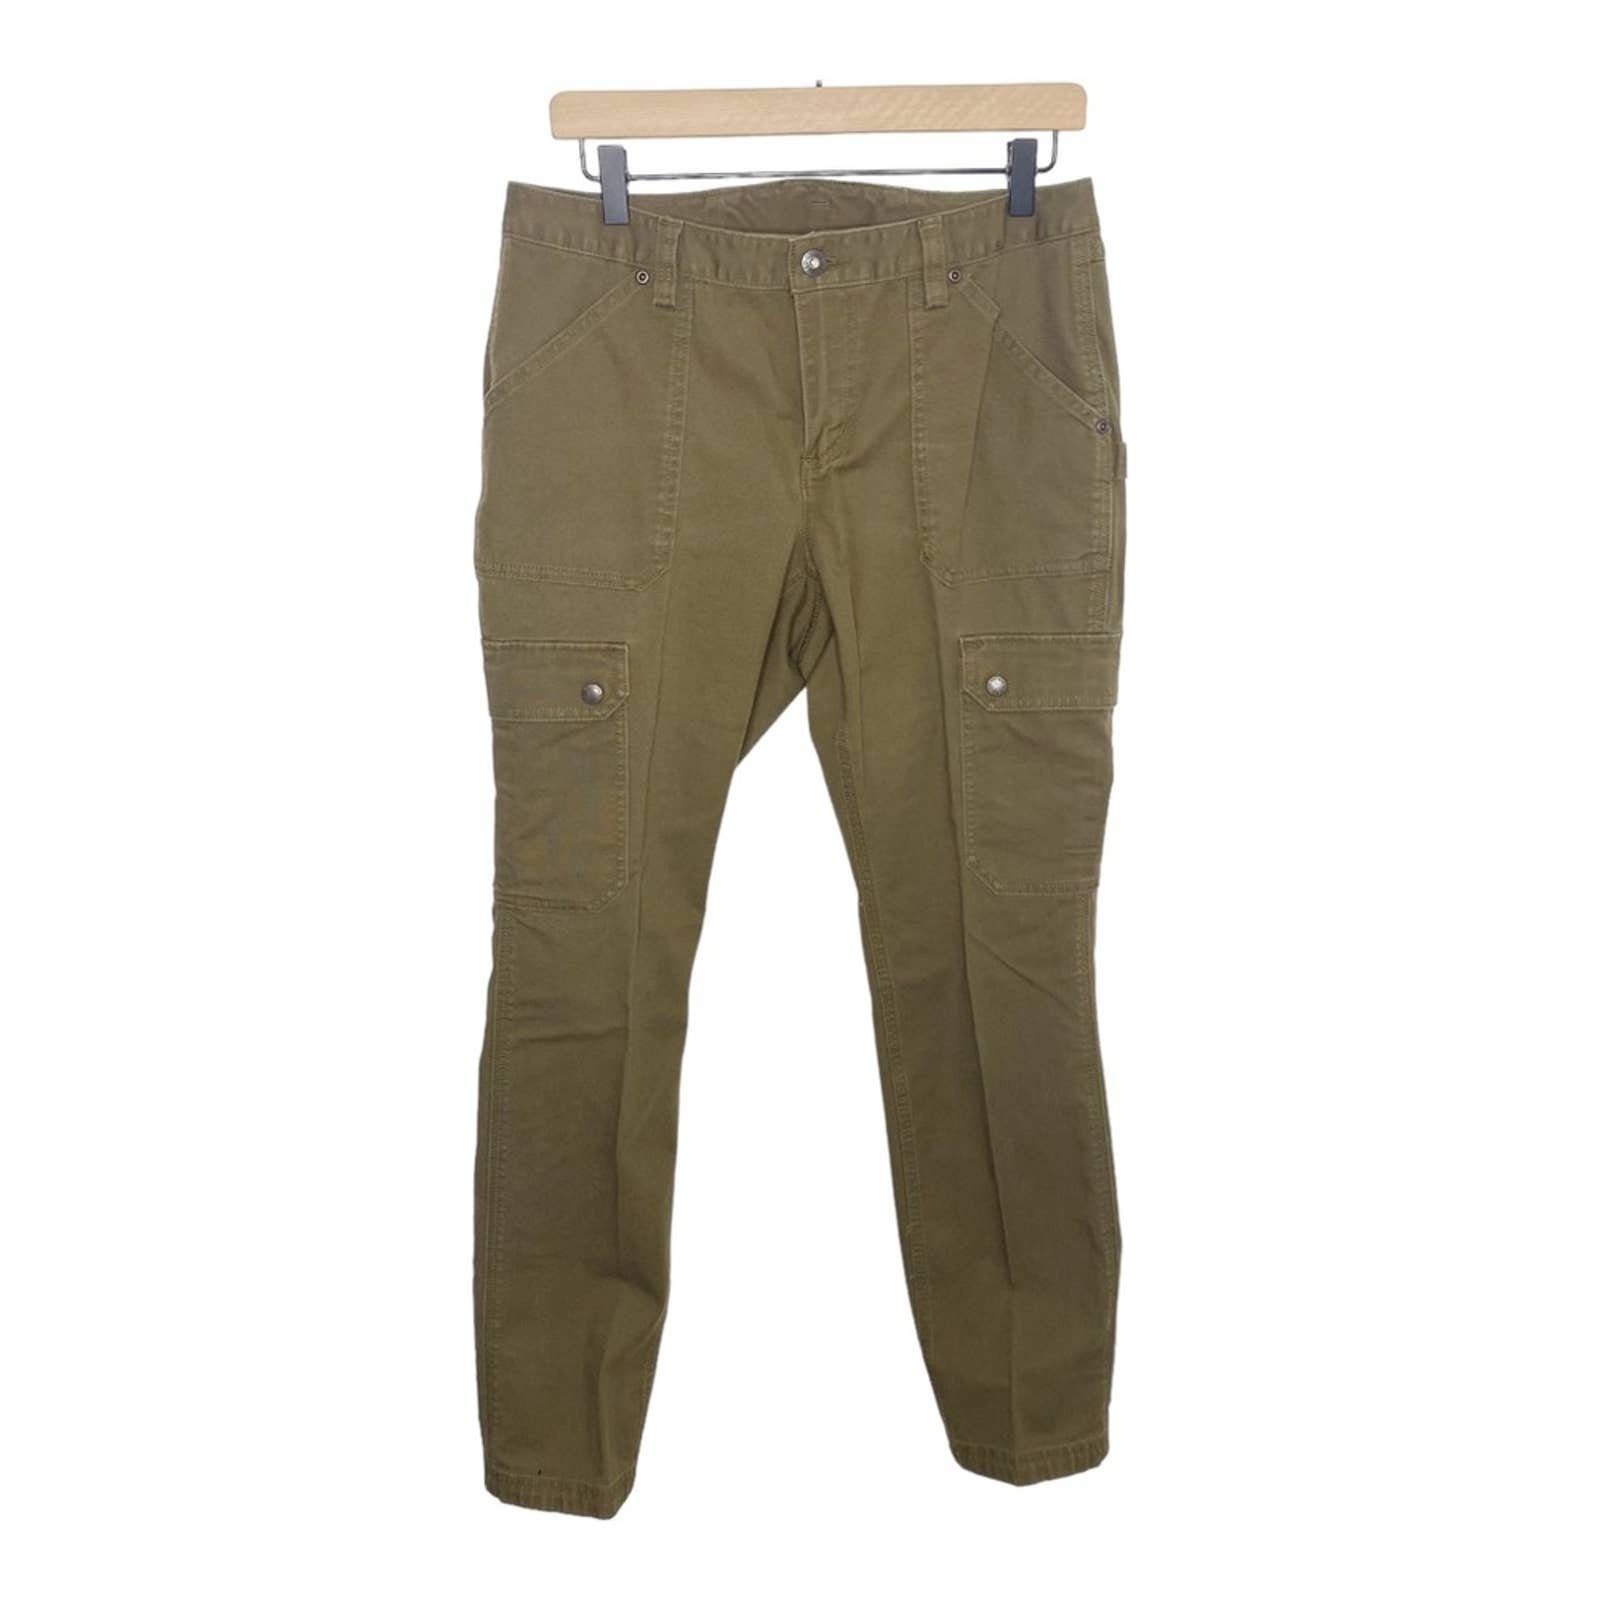 Nice Duluth cargo jeans pants olive green size 10 Iq7UB